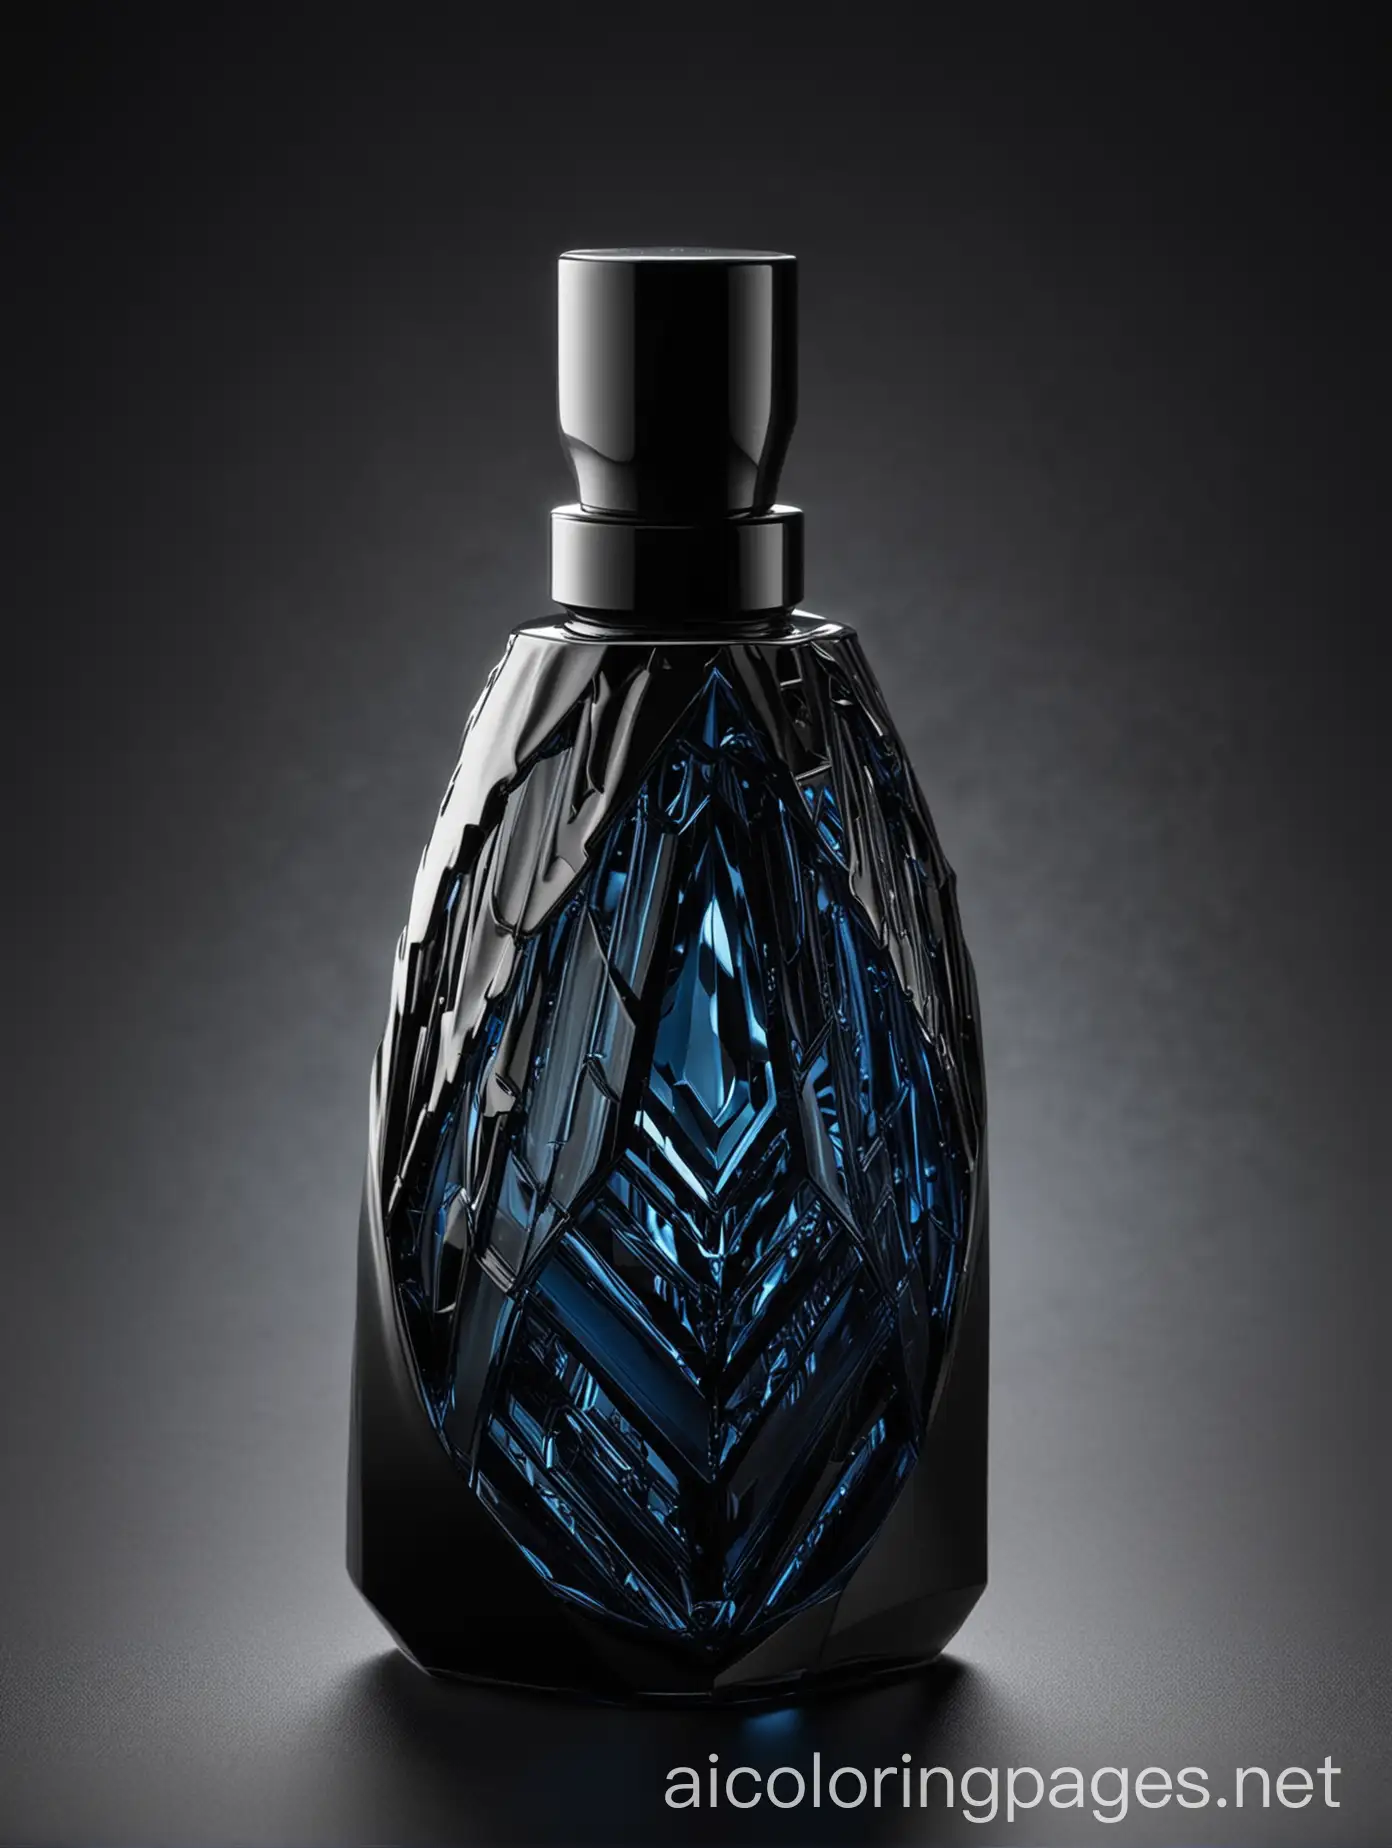 Design an image of a modern and eye-catching men's perfume bottle with a unique and striking appearance that grabs attention. The bottle should have a distinctive and unconventional design, such as a geometric shape or a futuristic design. It could be made of dark glass or colored with metallic hues like glossy black or dark blue with silver or chrome accents. The cap should have an innovative design and perhaps feature intricate metallic details.

Place the bottle on a dark, elegant background with lighting that highlights its details and geometric shapes. You can add visual effects like a light beam or a subtle mist around the bottle to give it a magical and mysterious touch. Include surrounding elements such as metal pieces or neon lights to emphasize the bottle's modern and bold character."
, Coloring Page, black and white, line art, white background, Simplicity, Ample White Space. The background of the coloring page is plain white to make it easy for young children to color within the lines. The outlines of all the subjects are easy to distinguish, making it simple for kids to color without too much difficulty